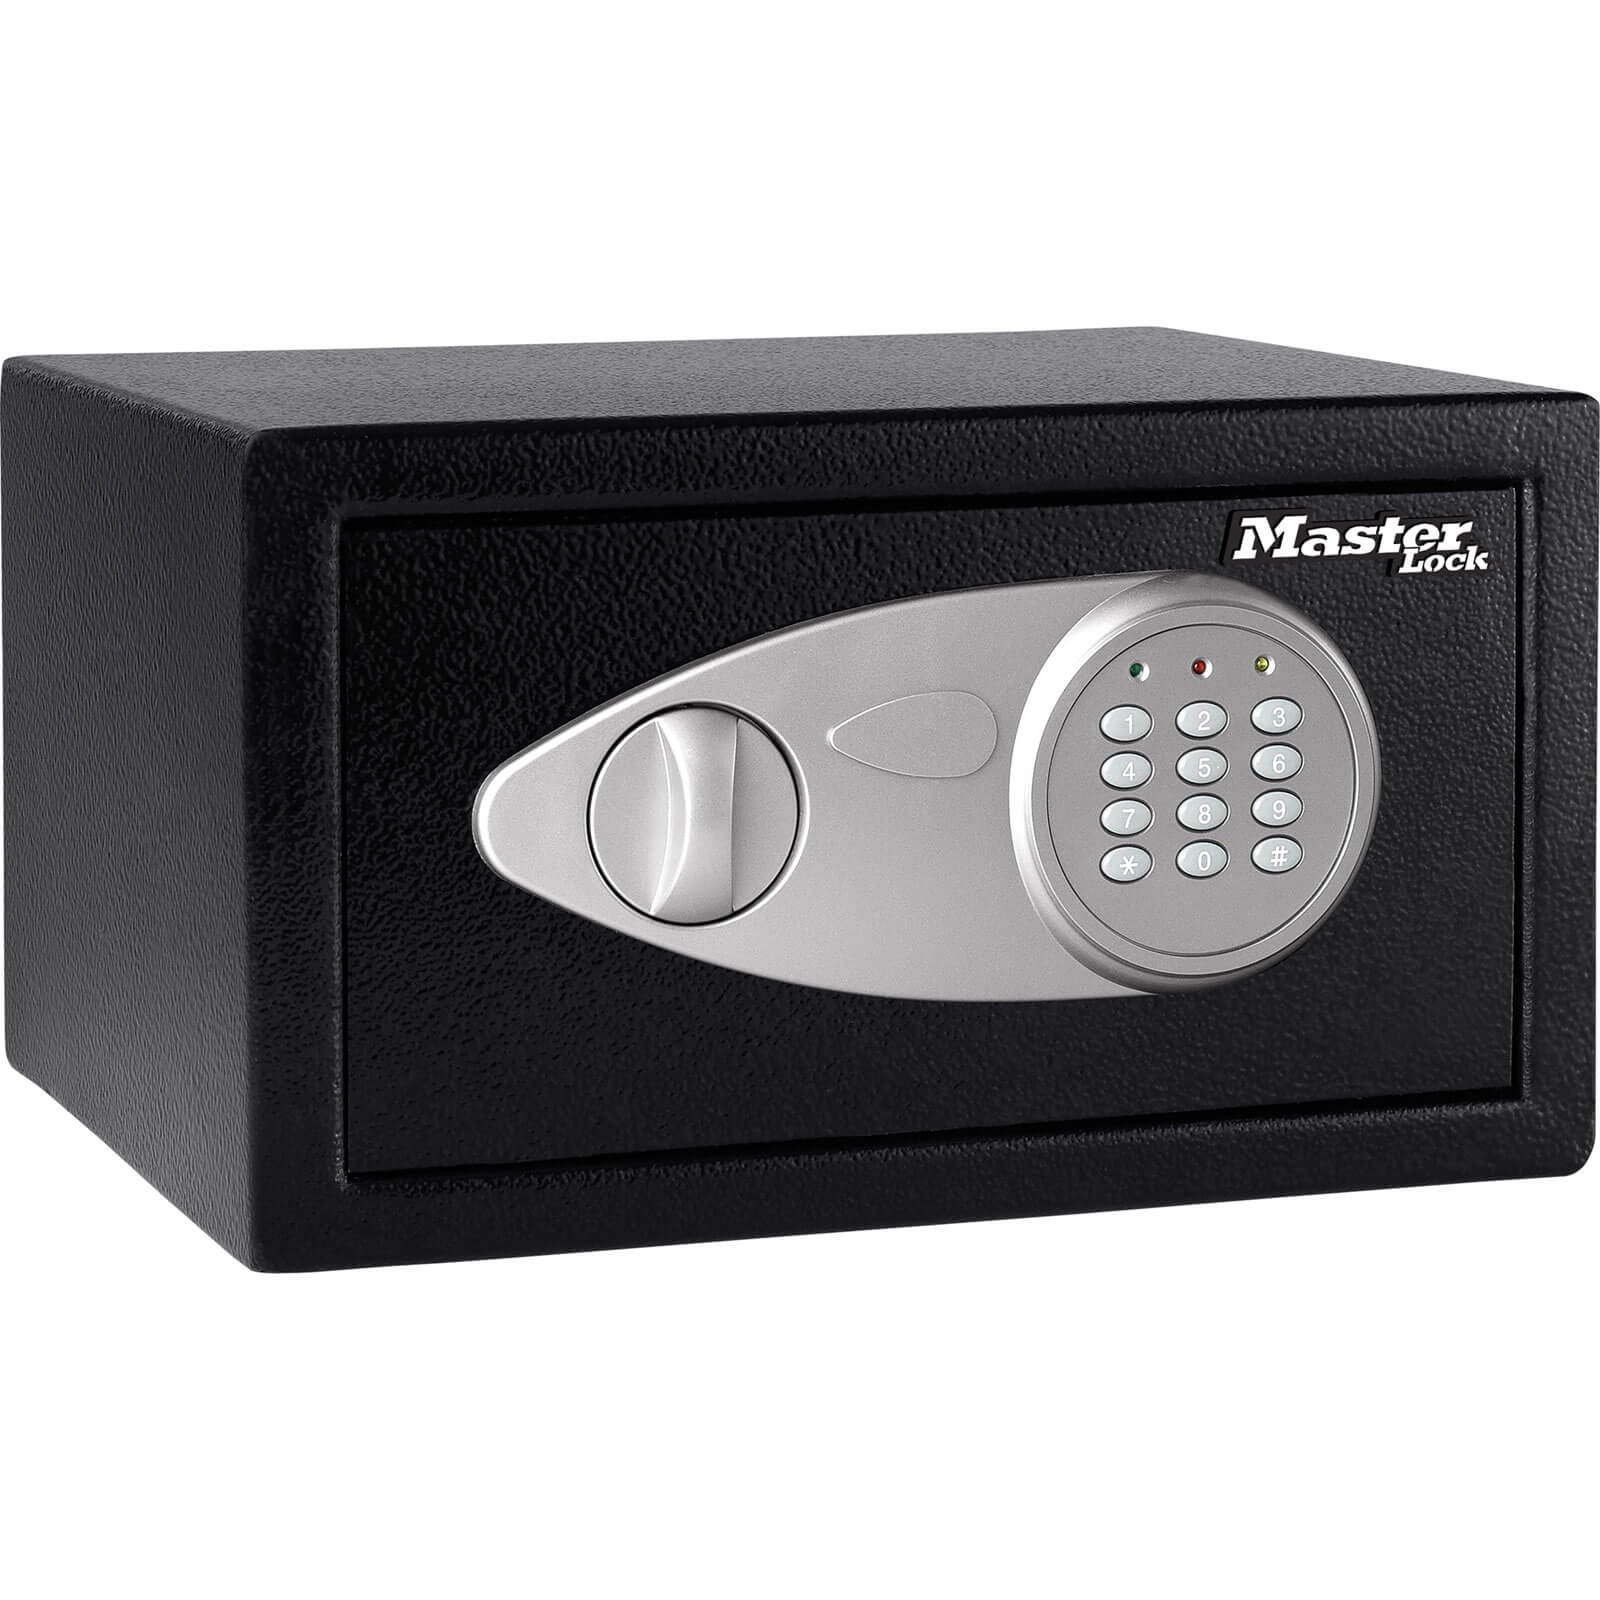 Click to view product details and reviews for Master Lock Medium Digital Safe.